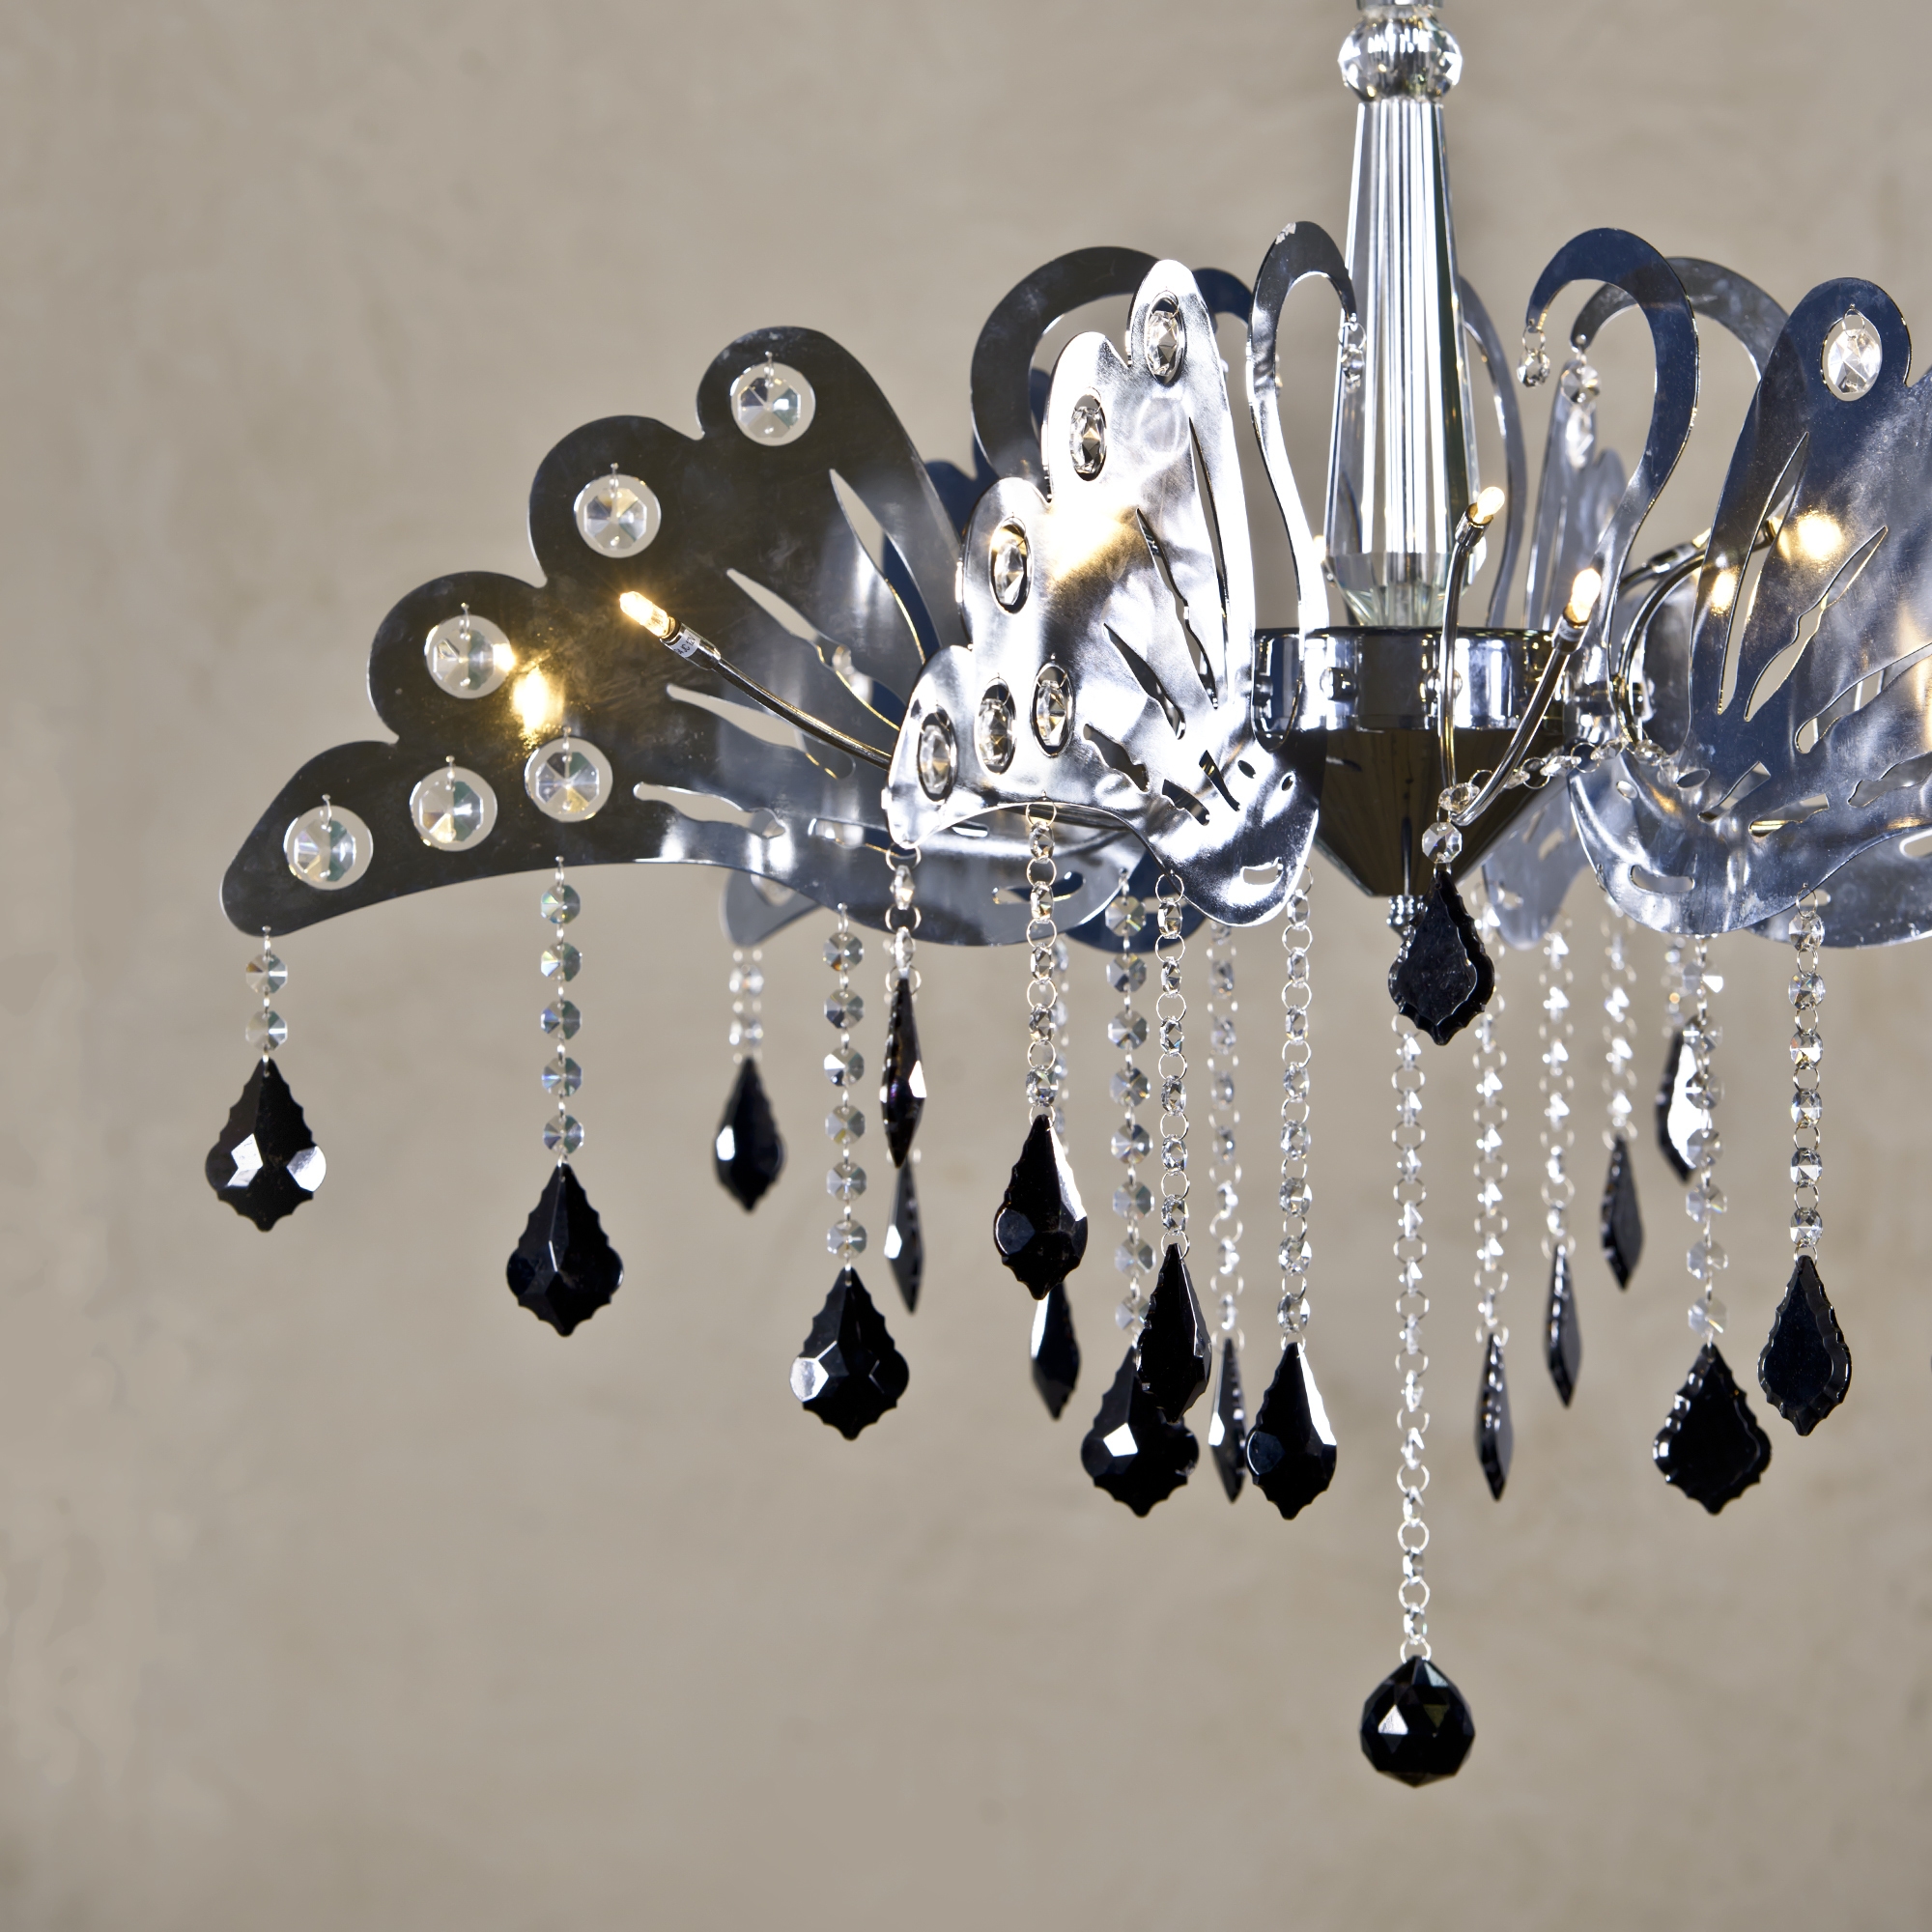 Swan Chandelier Light - Chrome, Black and Clear